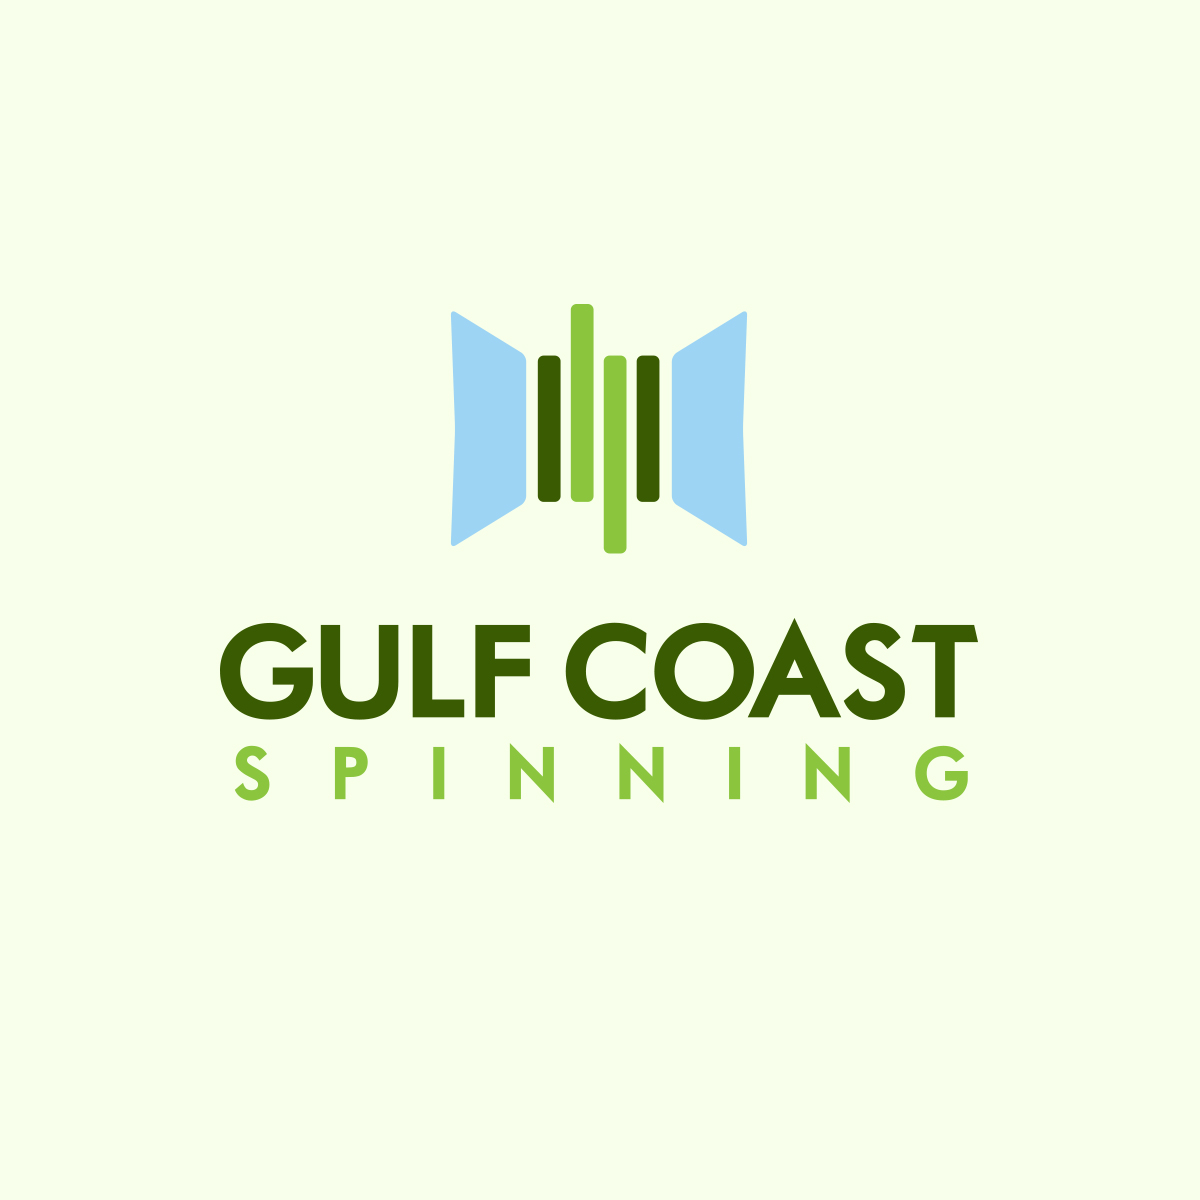 A Spinning wheel / loom shaped logo design for a company in Lafayette LA